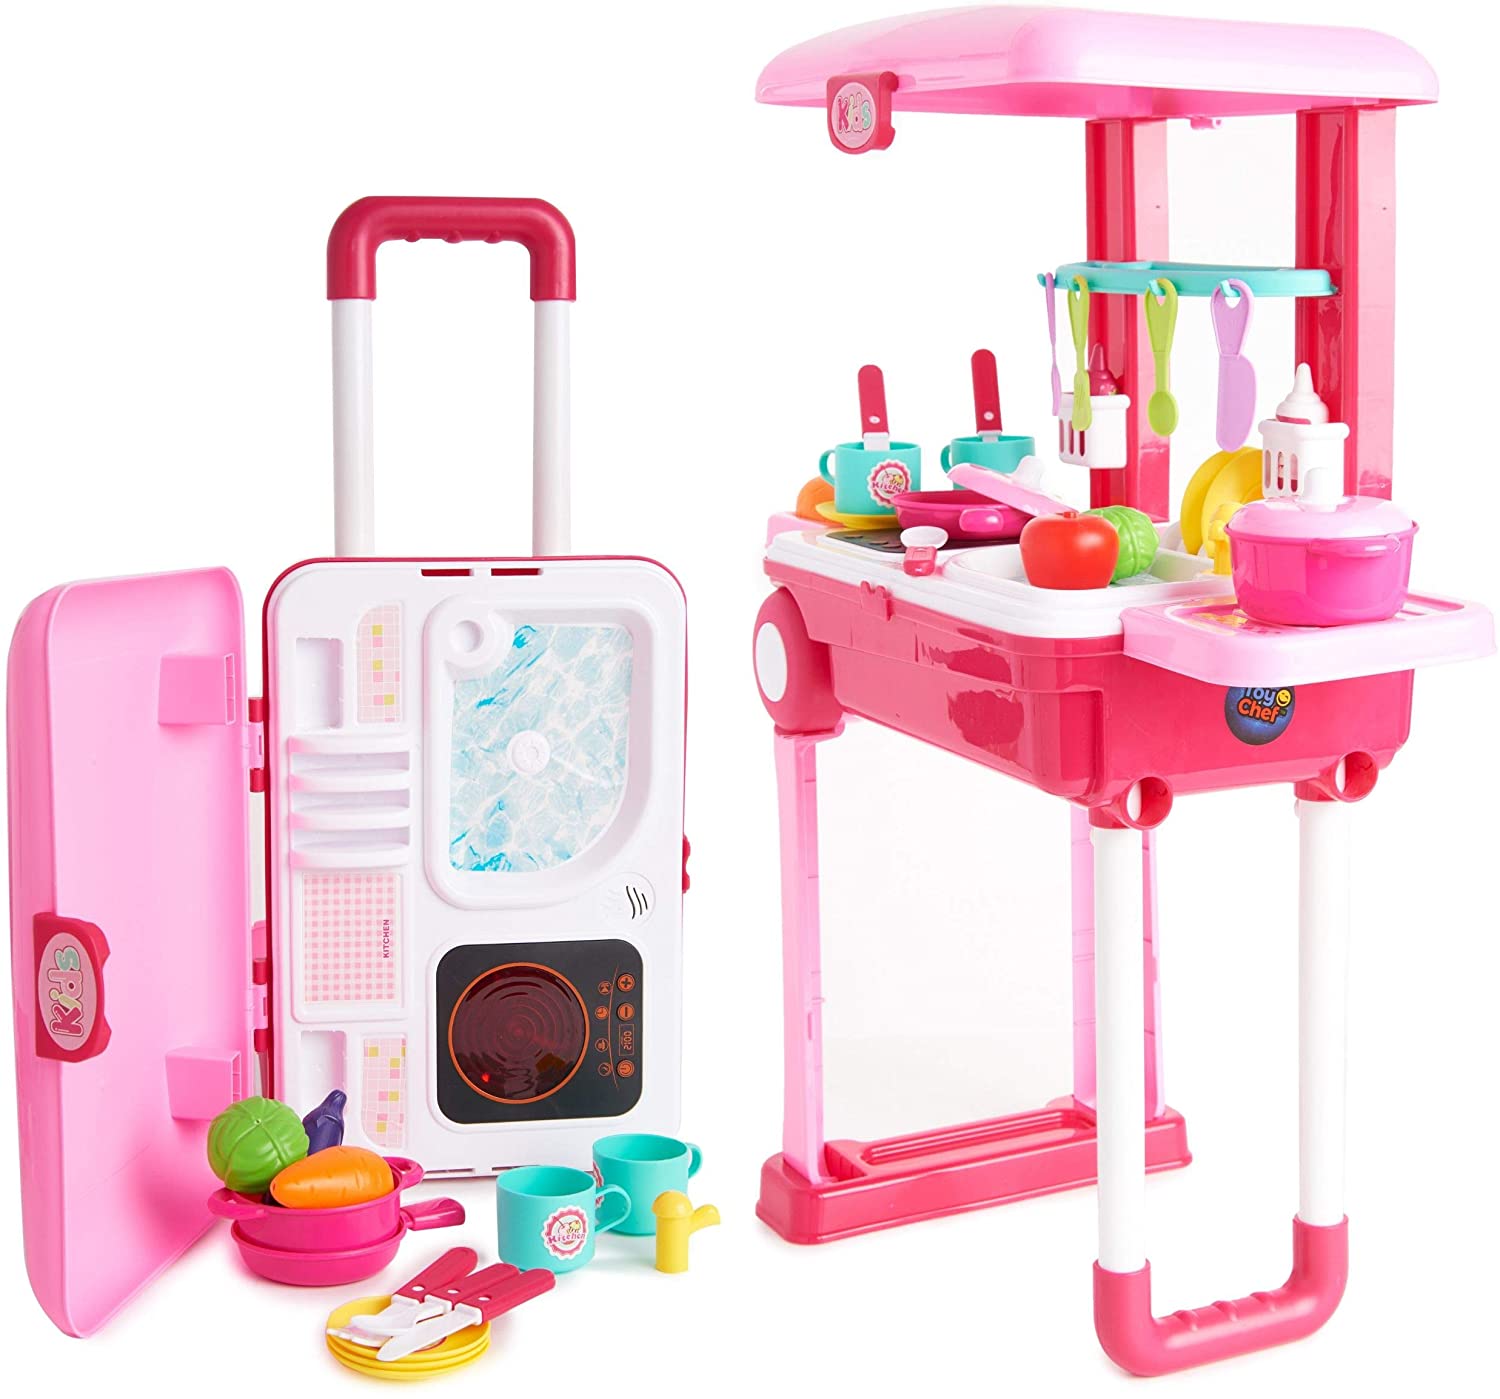 Toy Chef Traveling Non-Toxic Play Kitchen For Kids